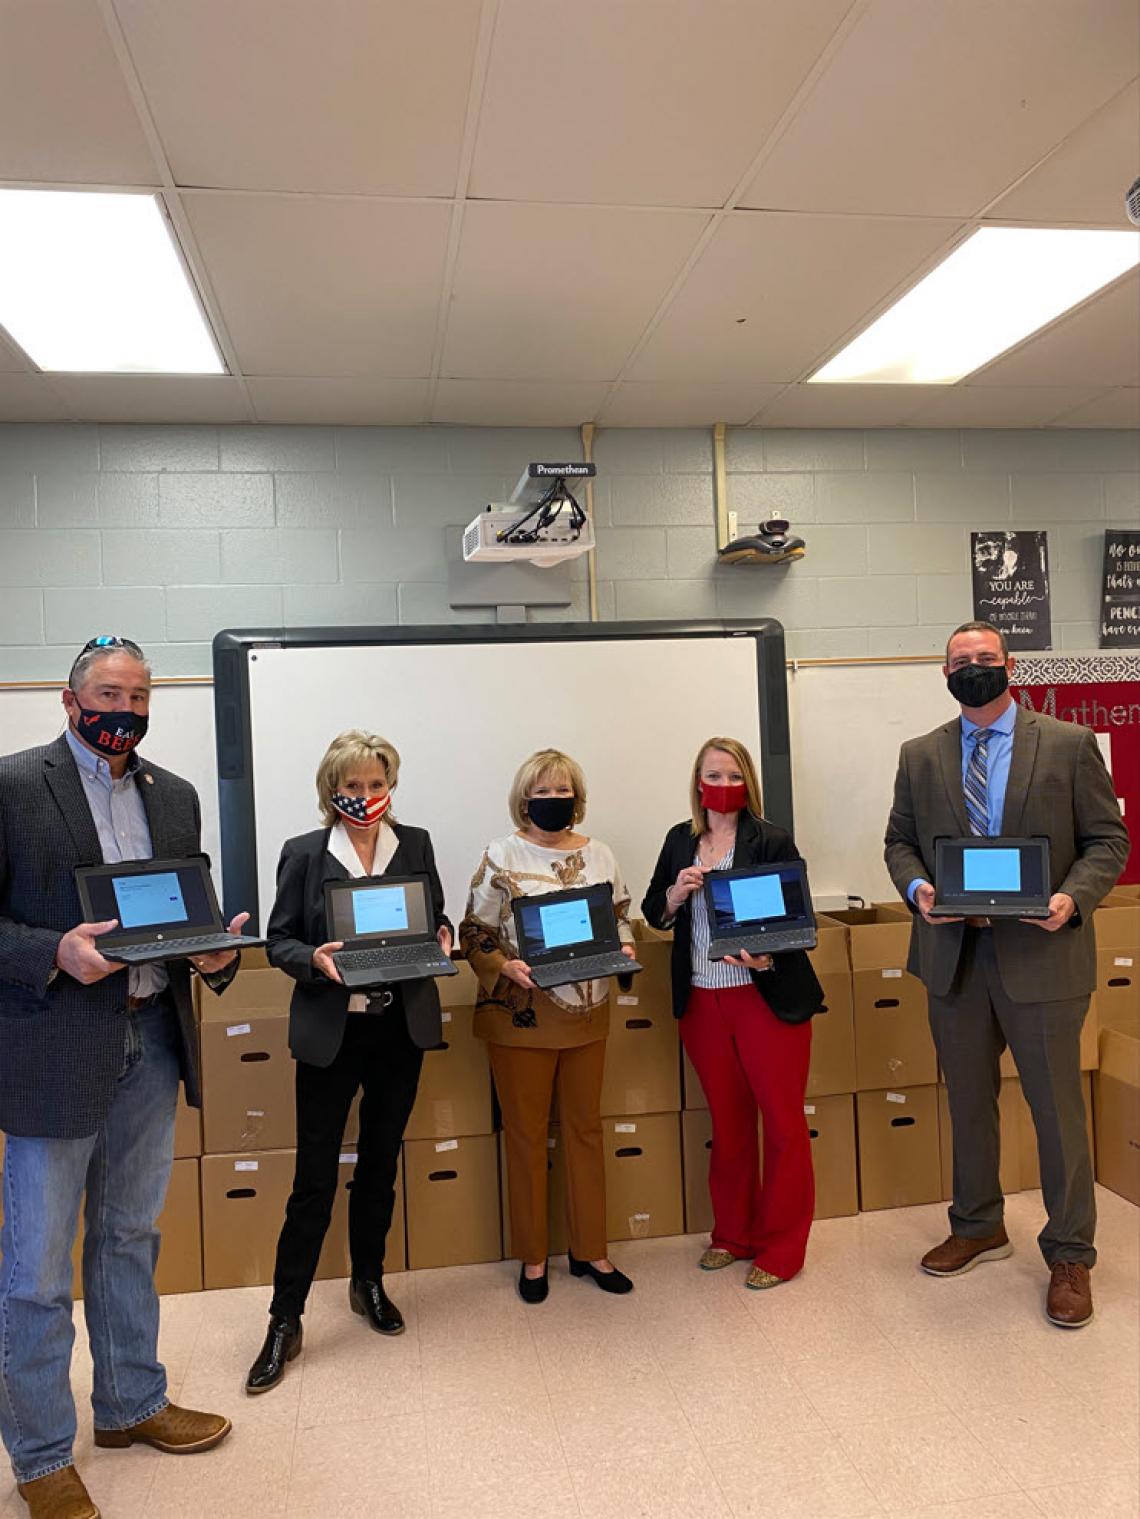 Senator Hyde-Smith presents CARES Act-funded laptops to Loyd Star School as classrooms are forced online due to the ongoing pandemic. (Nov. 3, 2020)